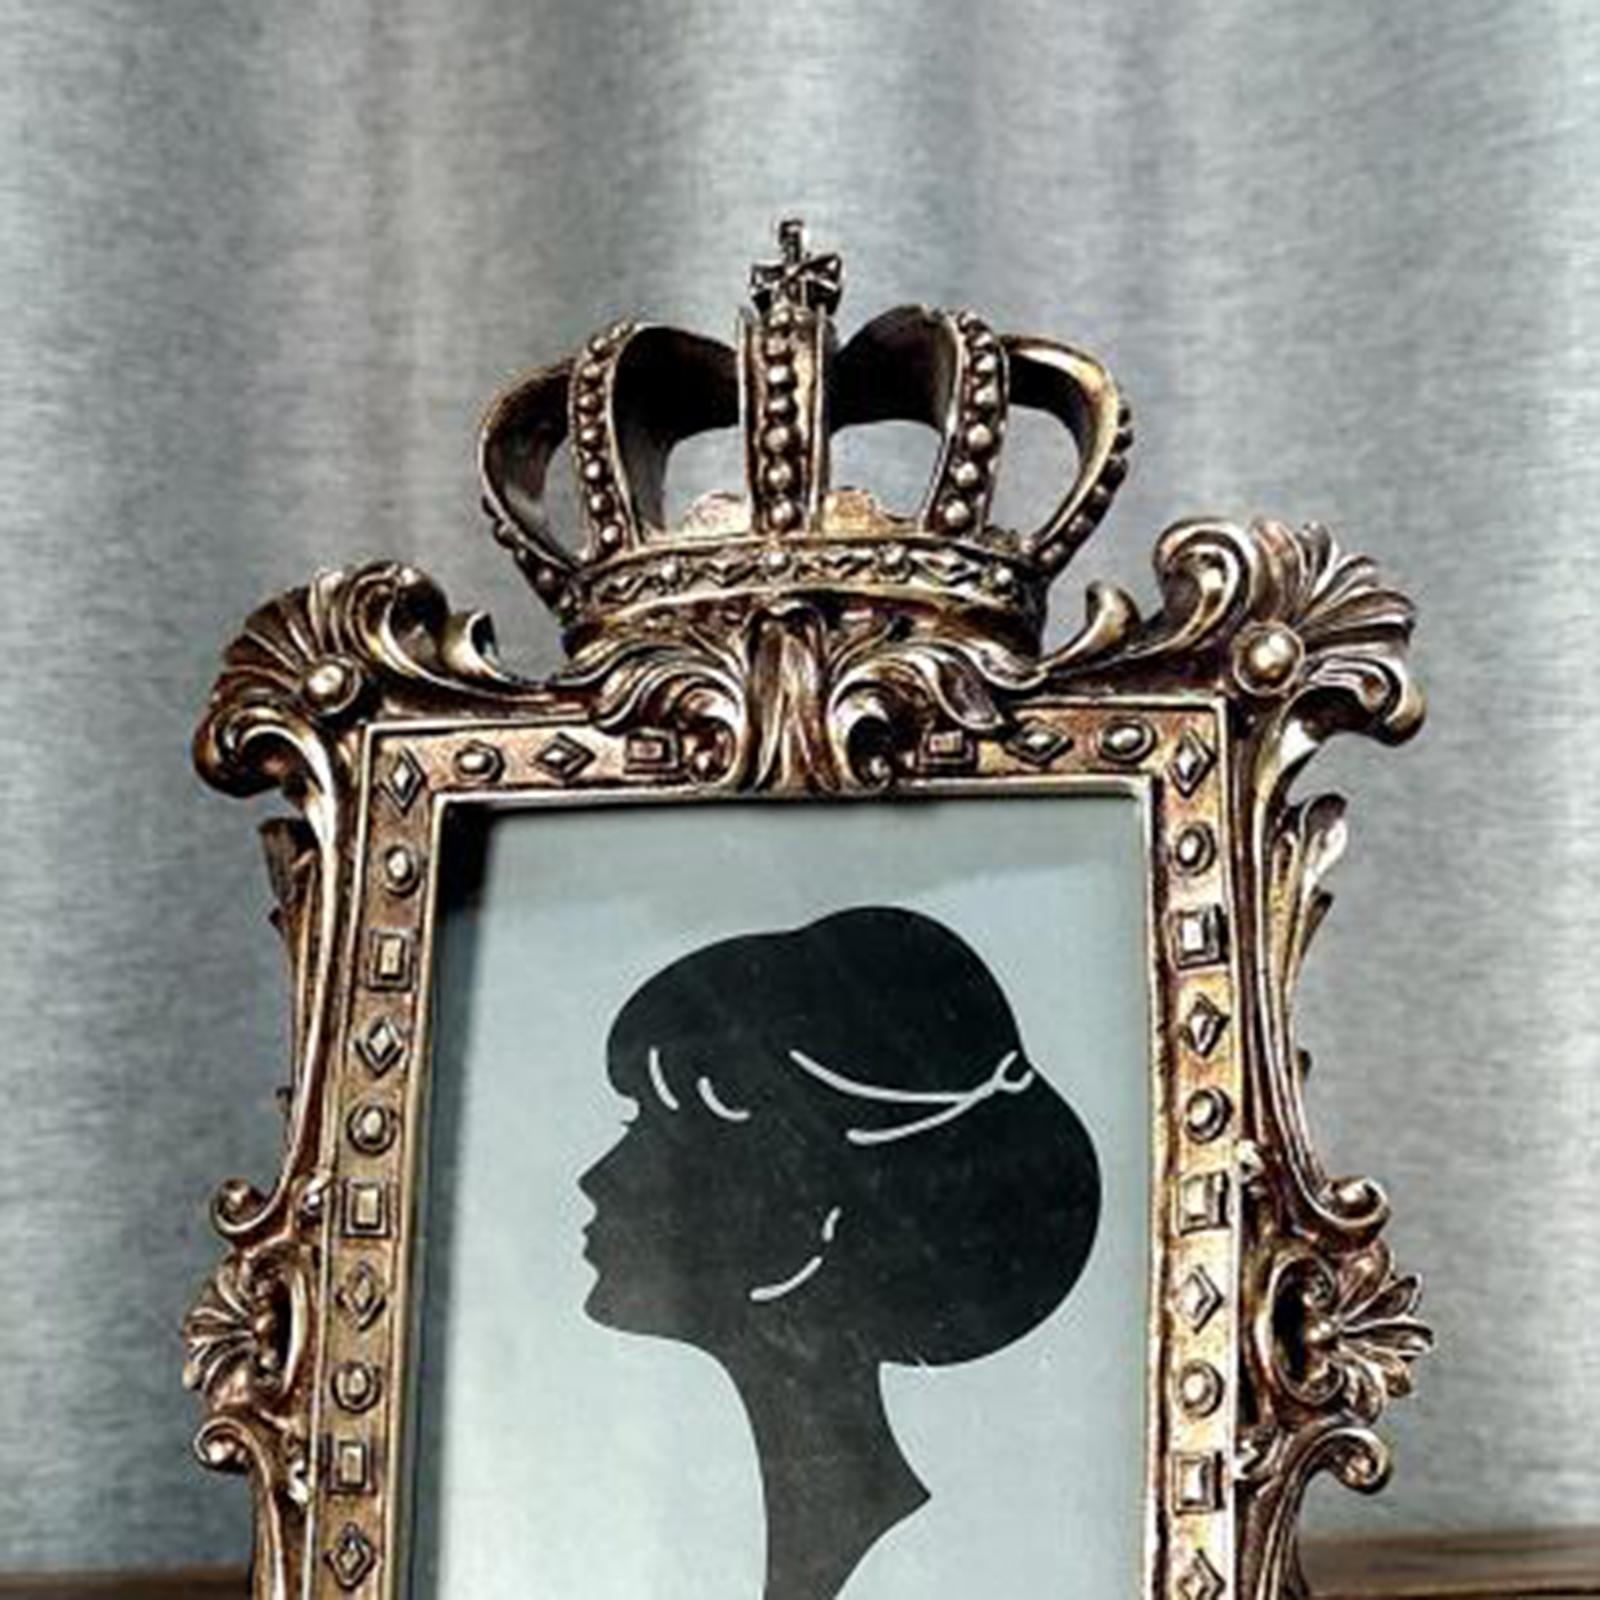 Retro Crown Style Picture Frame Photo Holder Crafts Livingroom Decor 6 inch